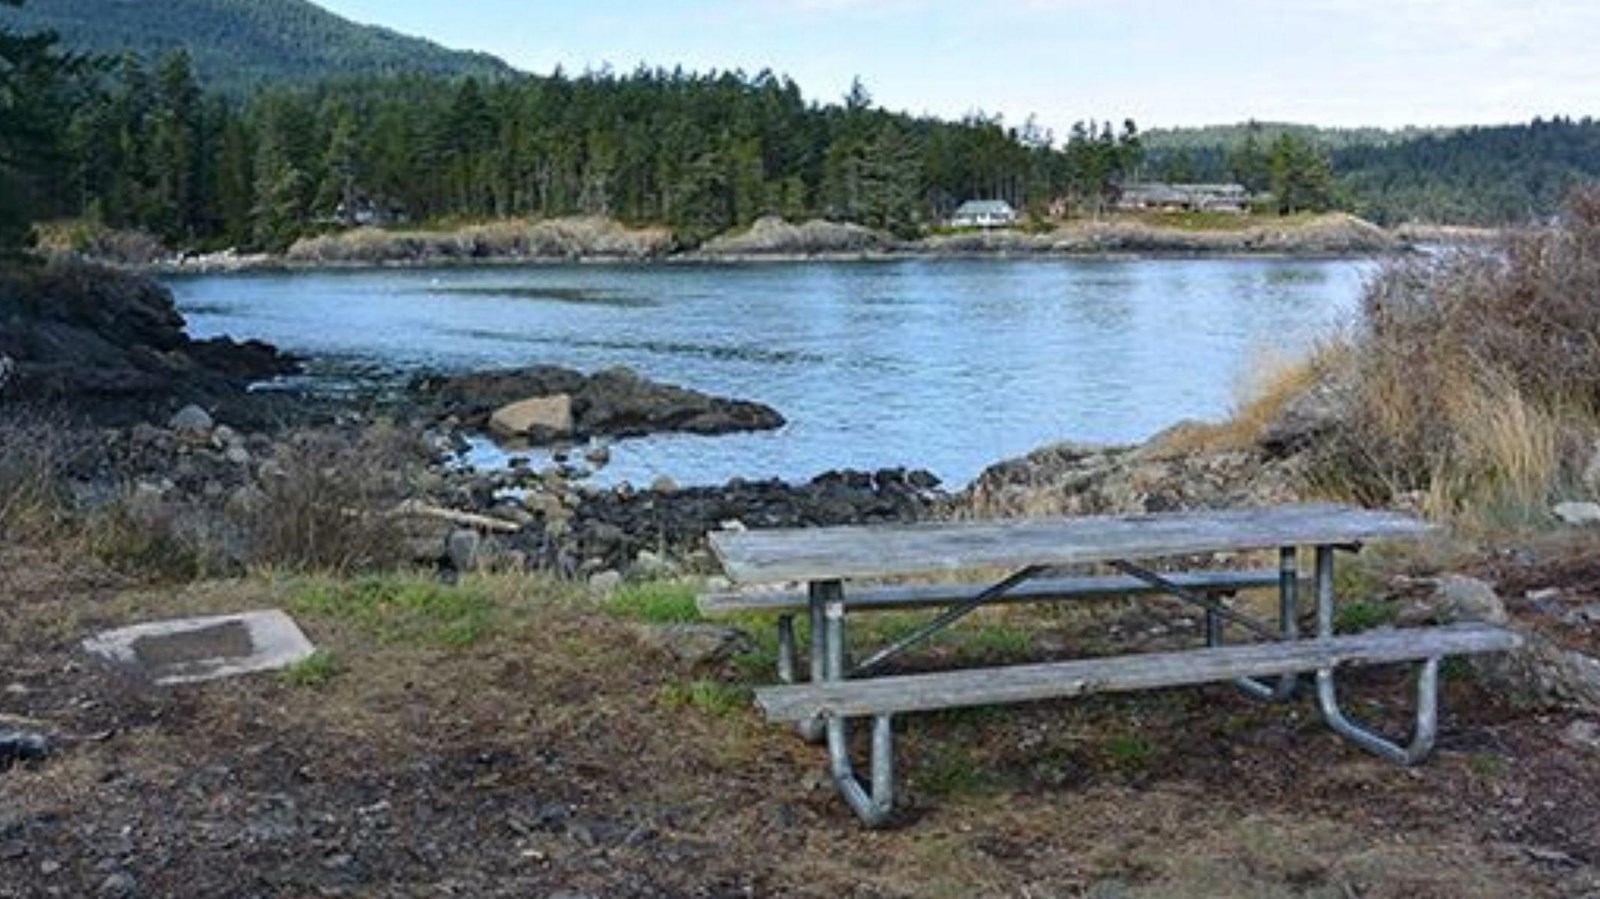 A picnic table overlooking the water